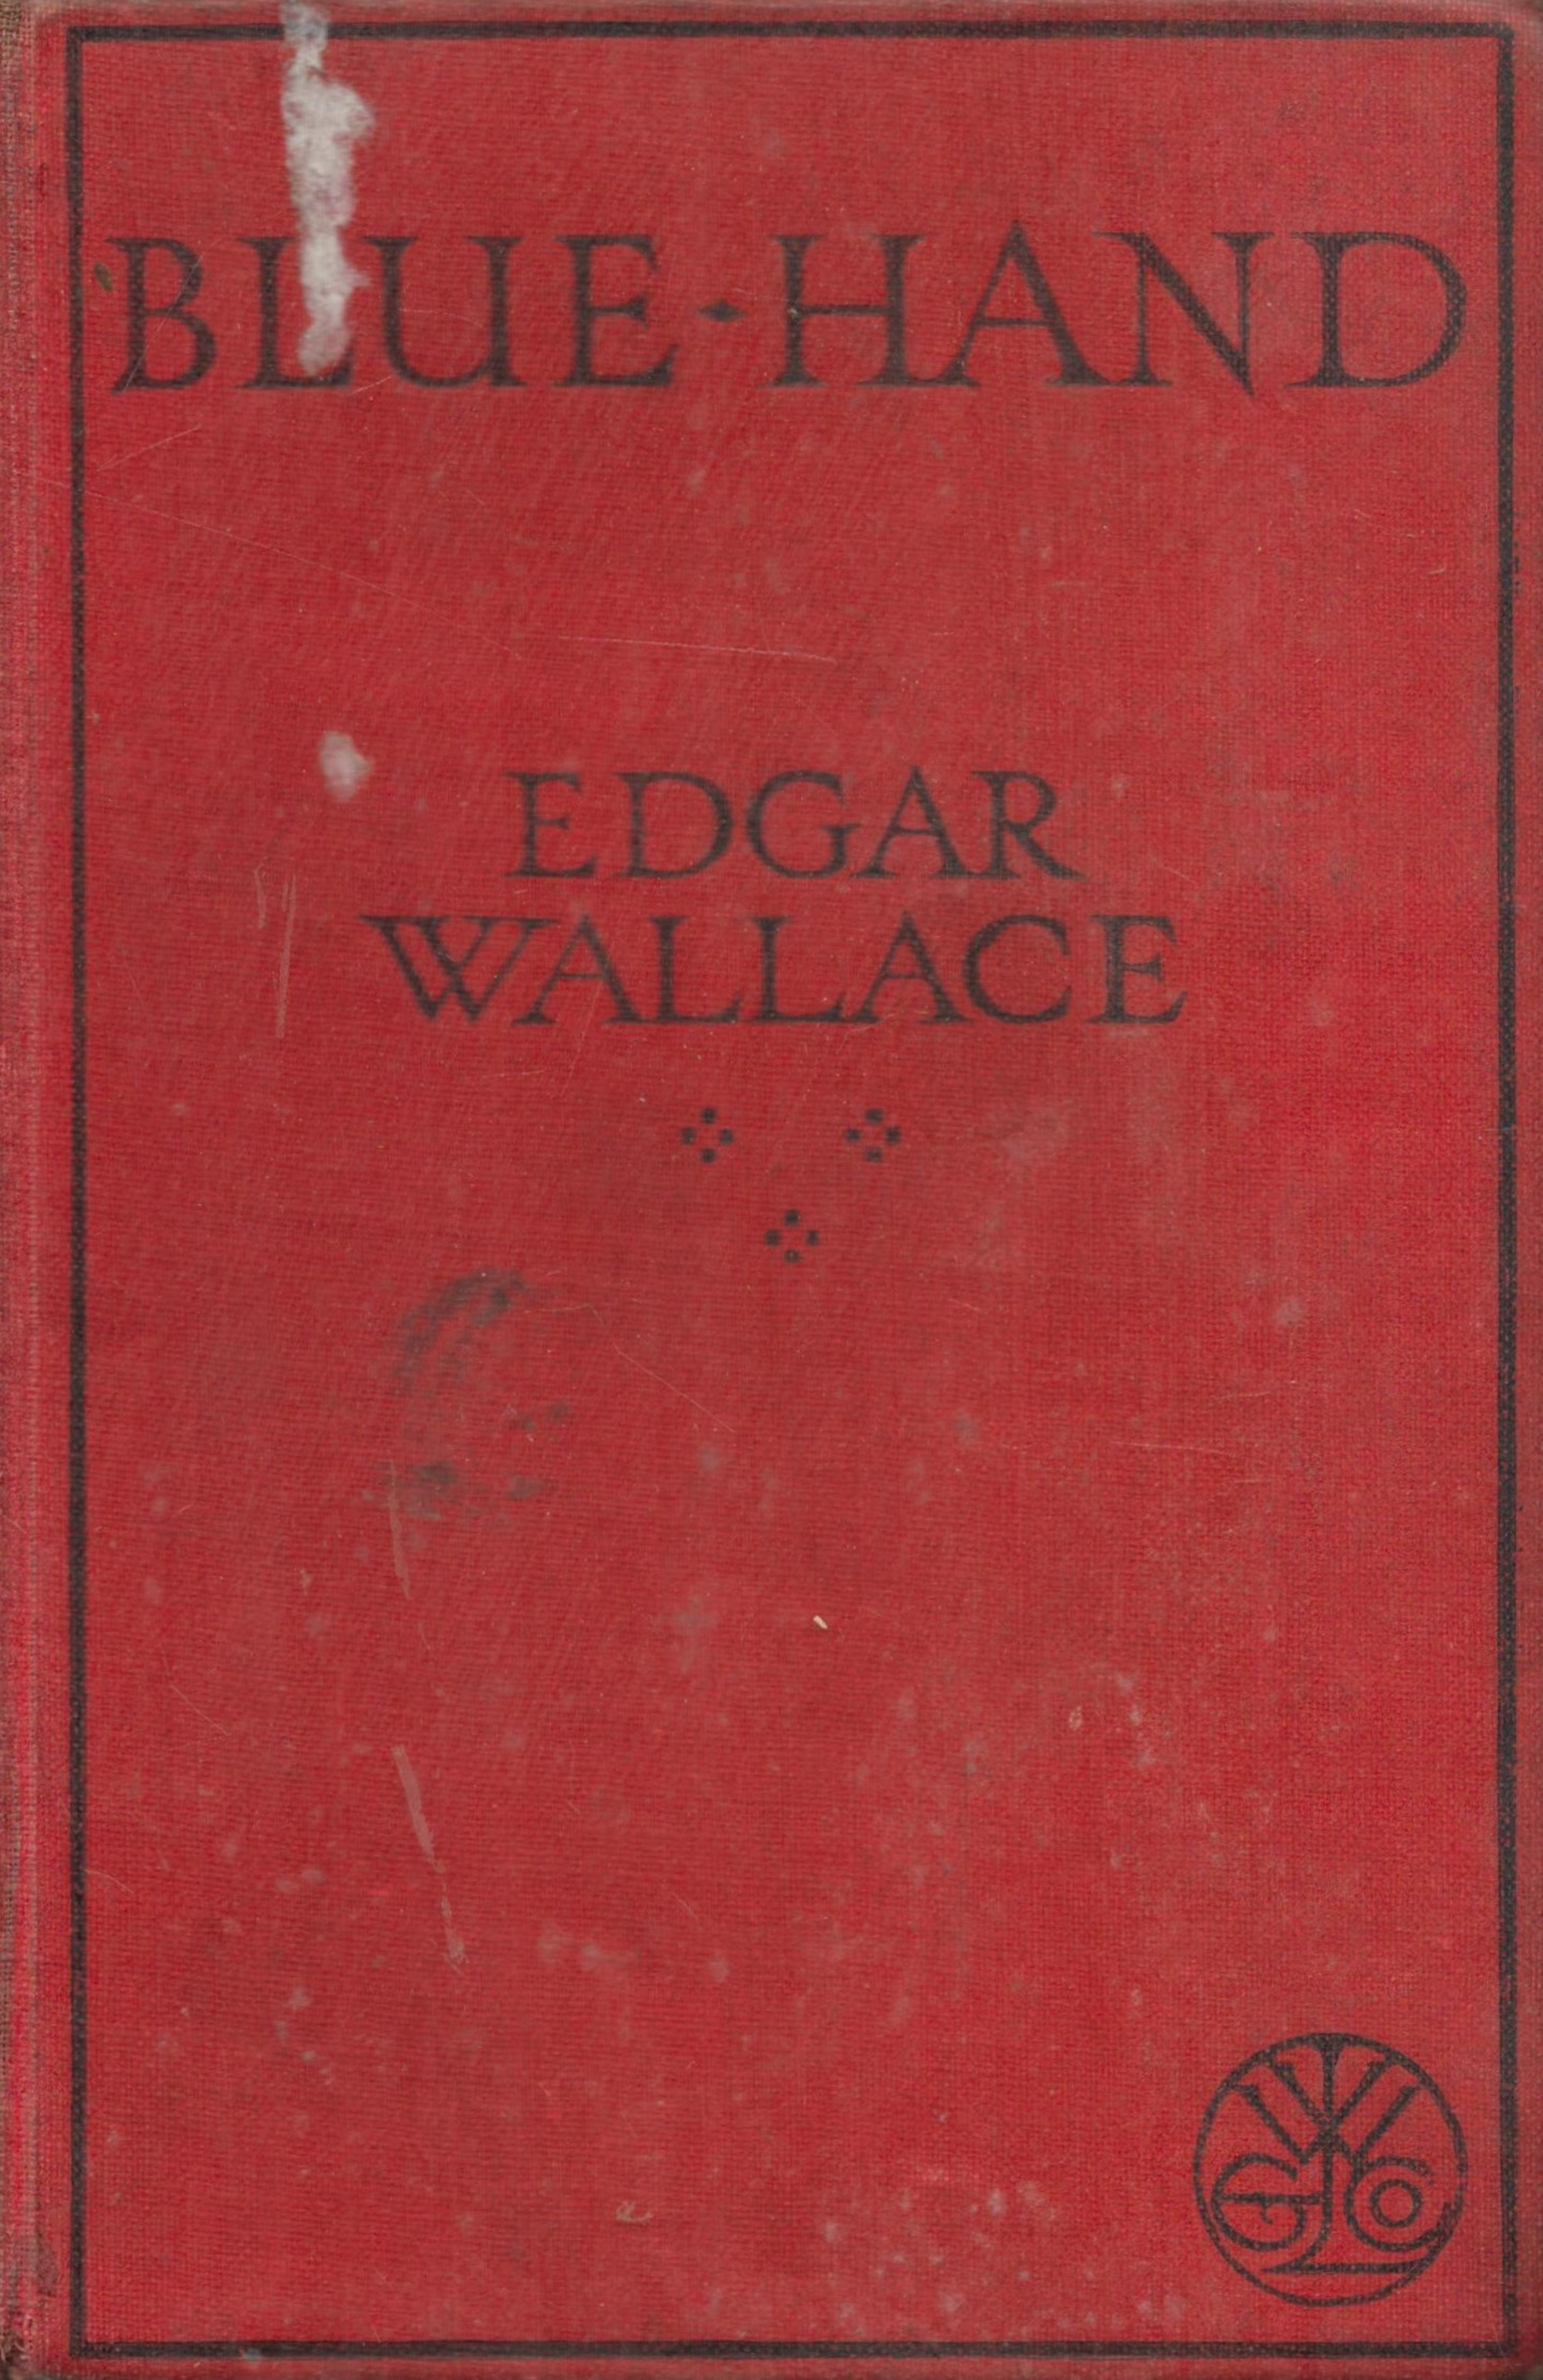 Edgar Wallace Blue Hand 1st Edition (1925) Book. We combine shipping on all lots. Single book £5.